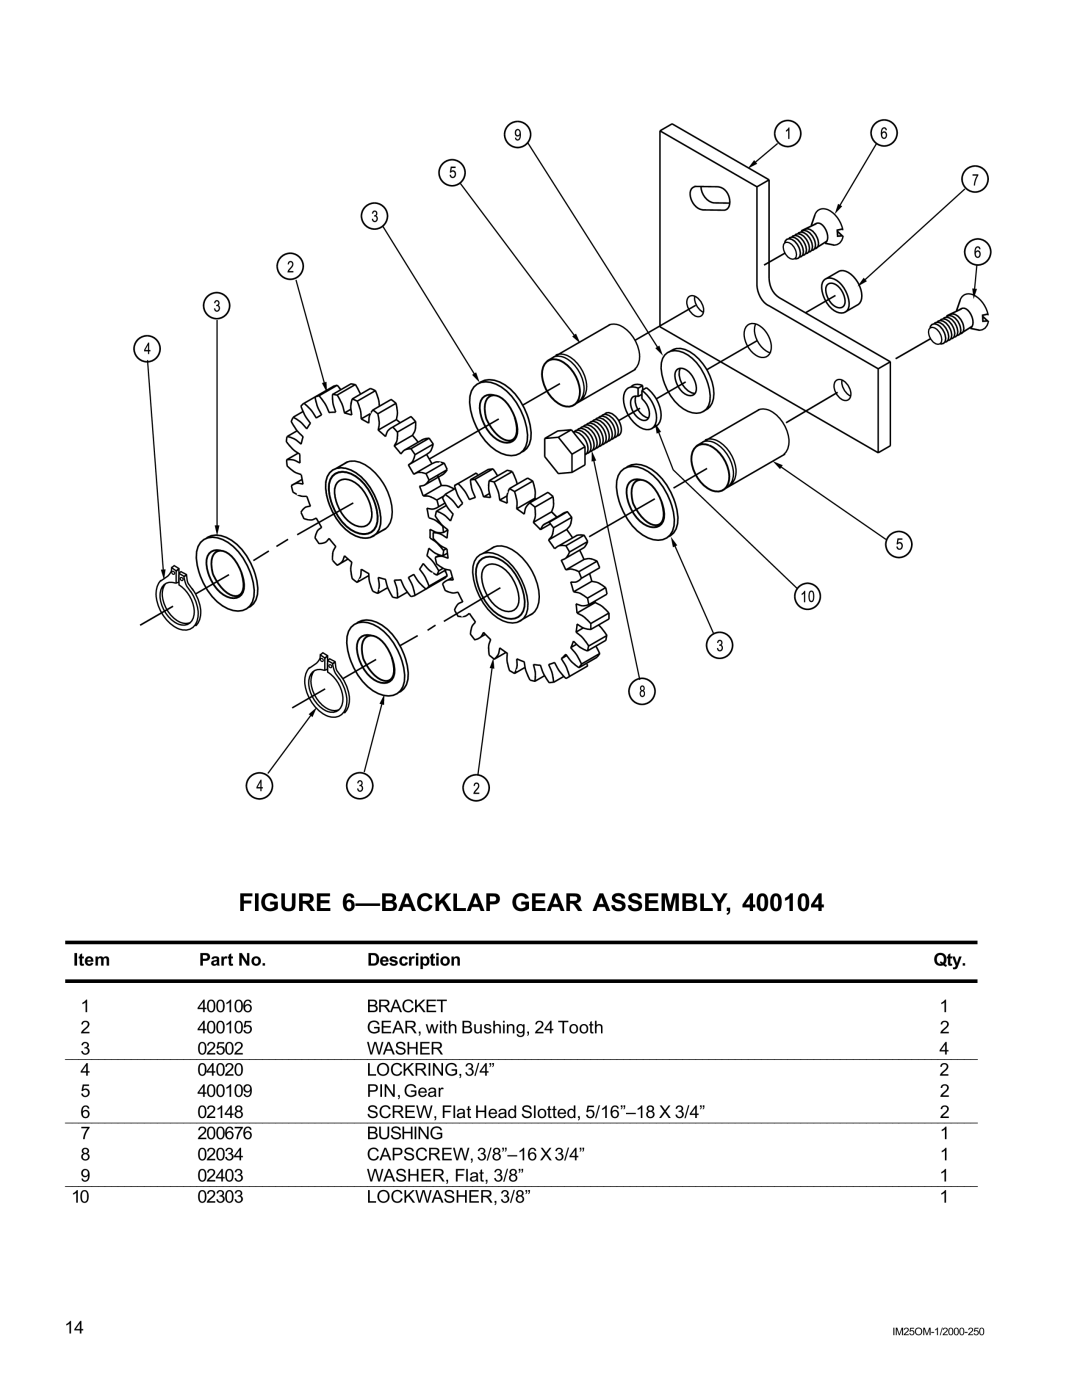 National Mower IM25 manual Backlap Gear Assembly 